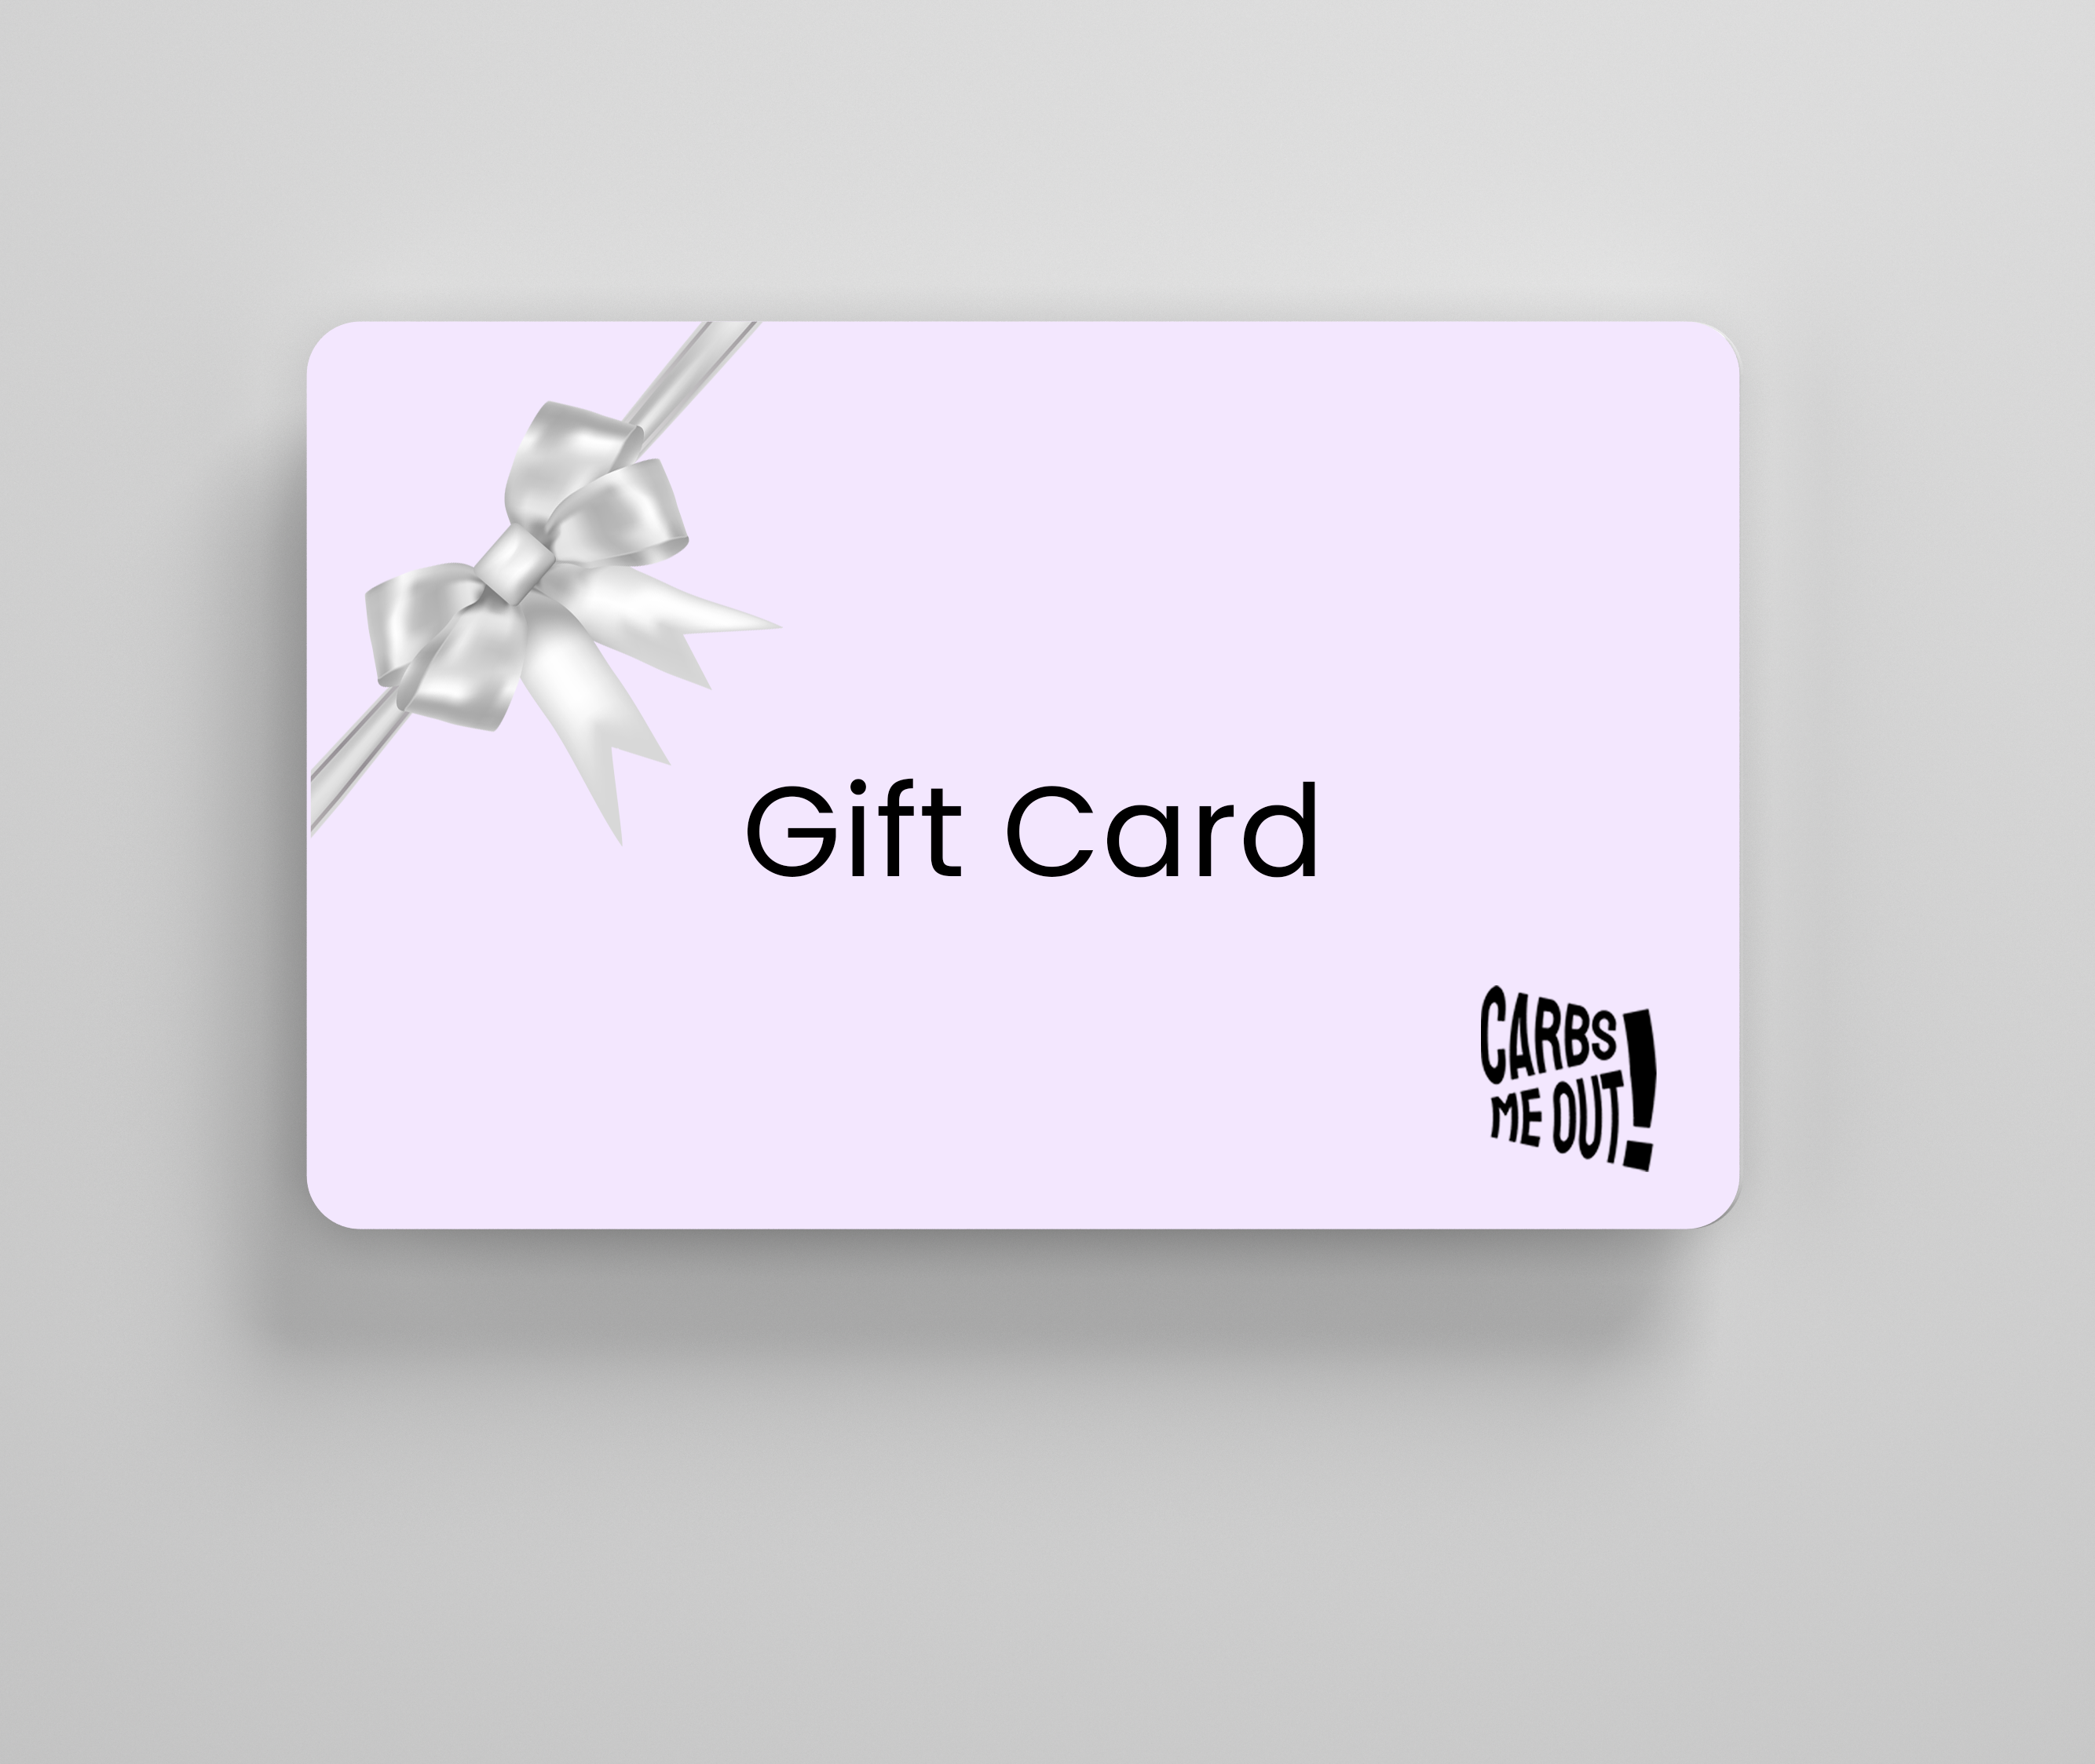 Carbs me out Gift Card Carbs Me Out!